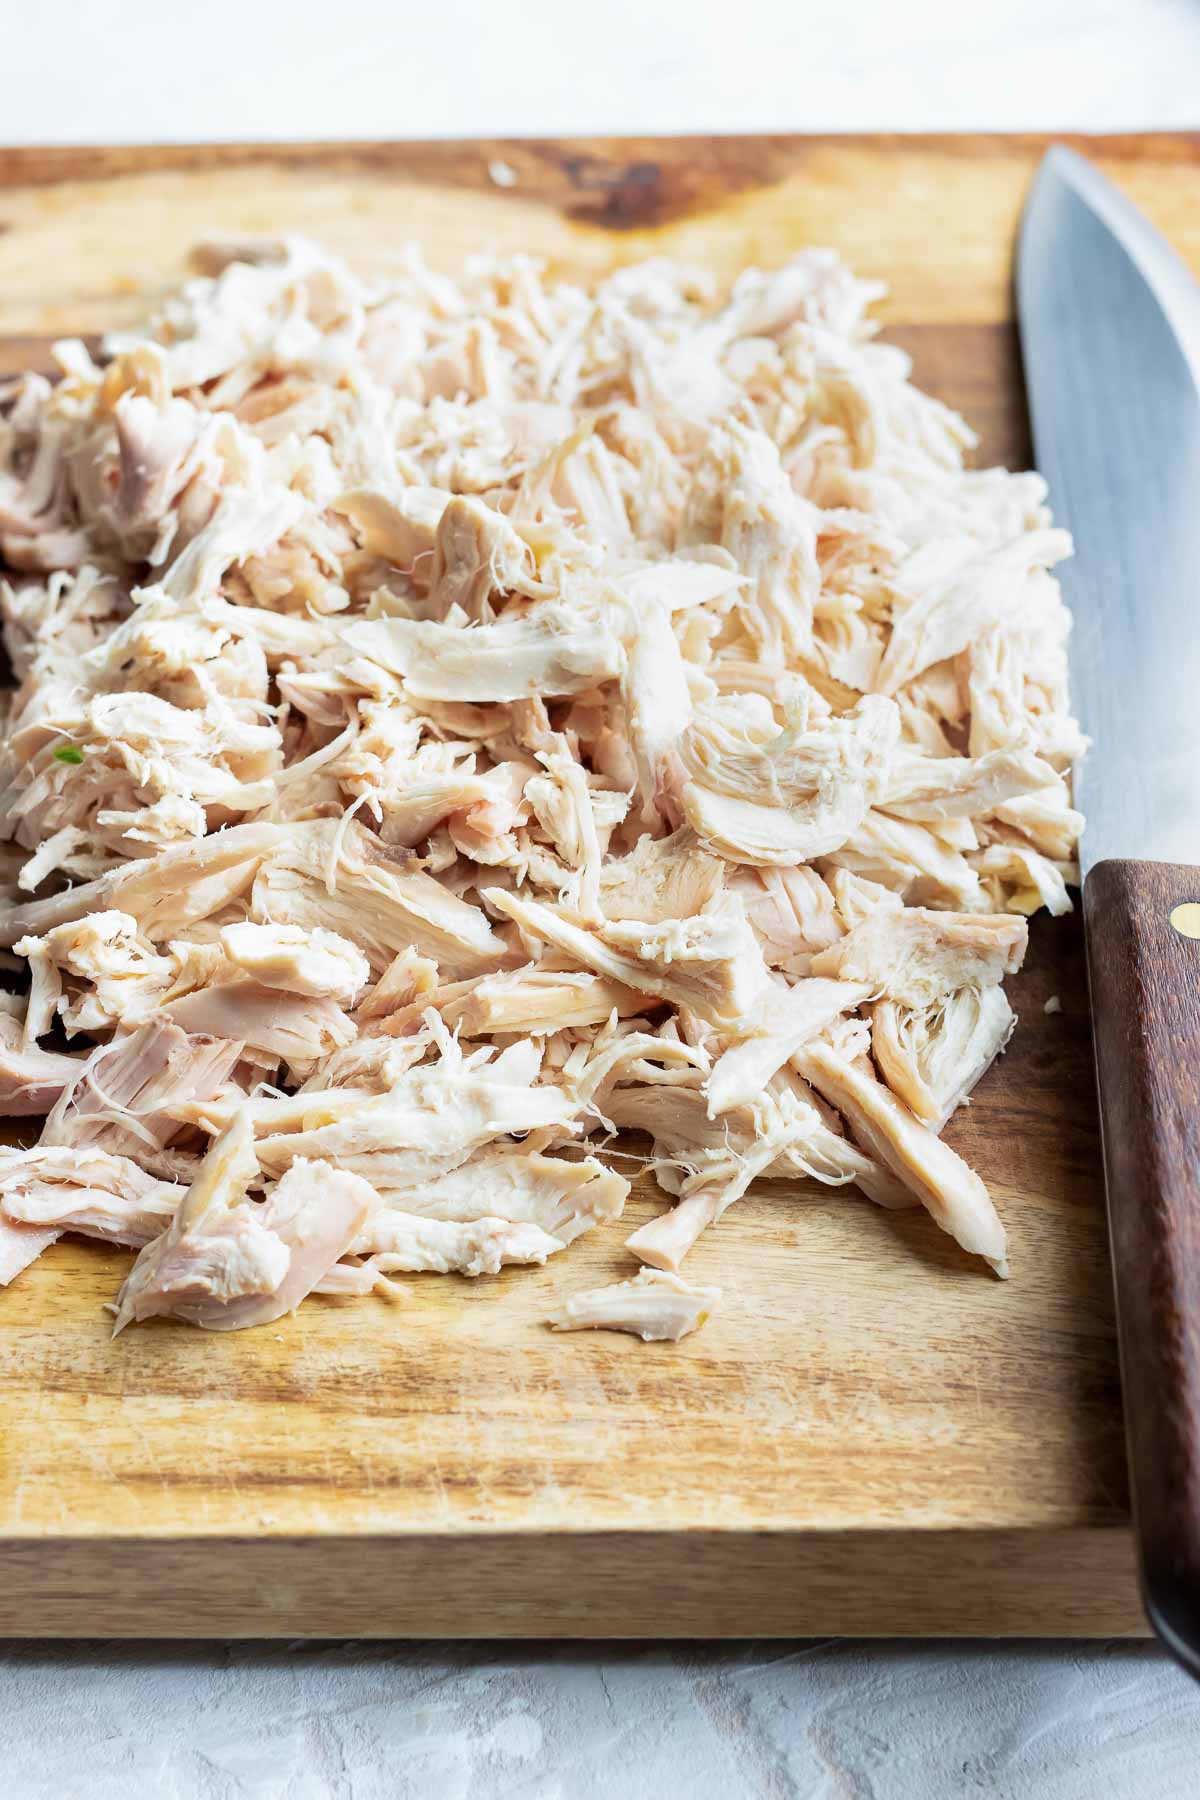 Shredded rotisserie chicken on a wooden cutting board for a chicken taquitos recipe.